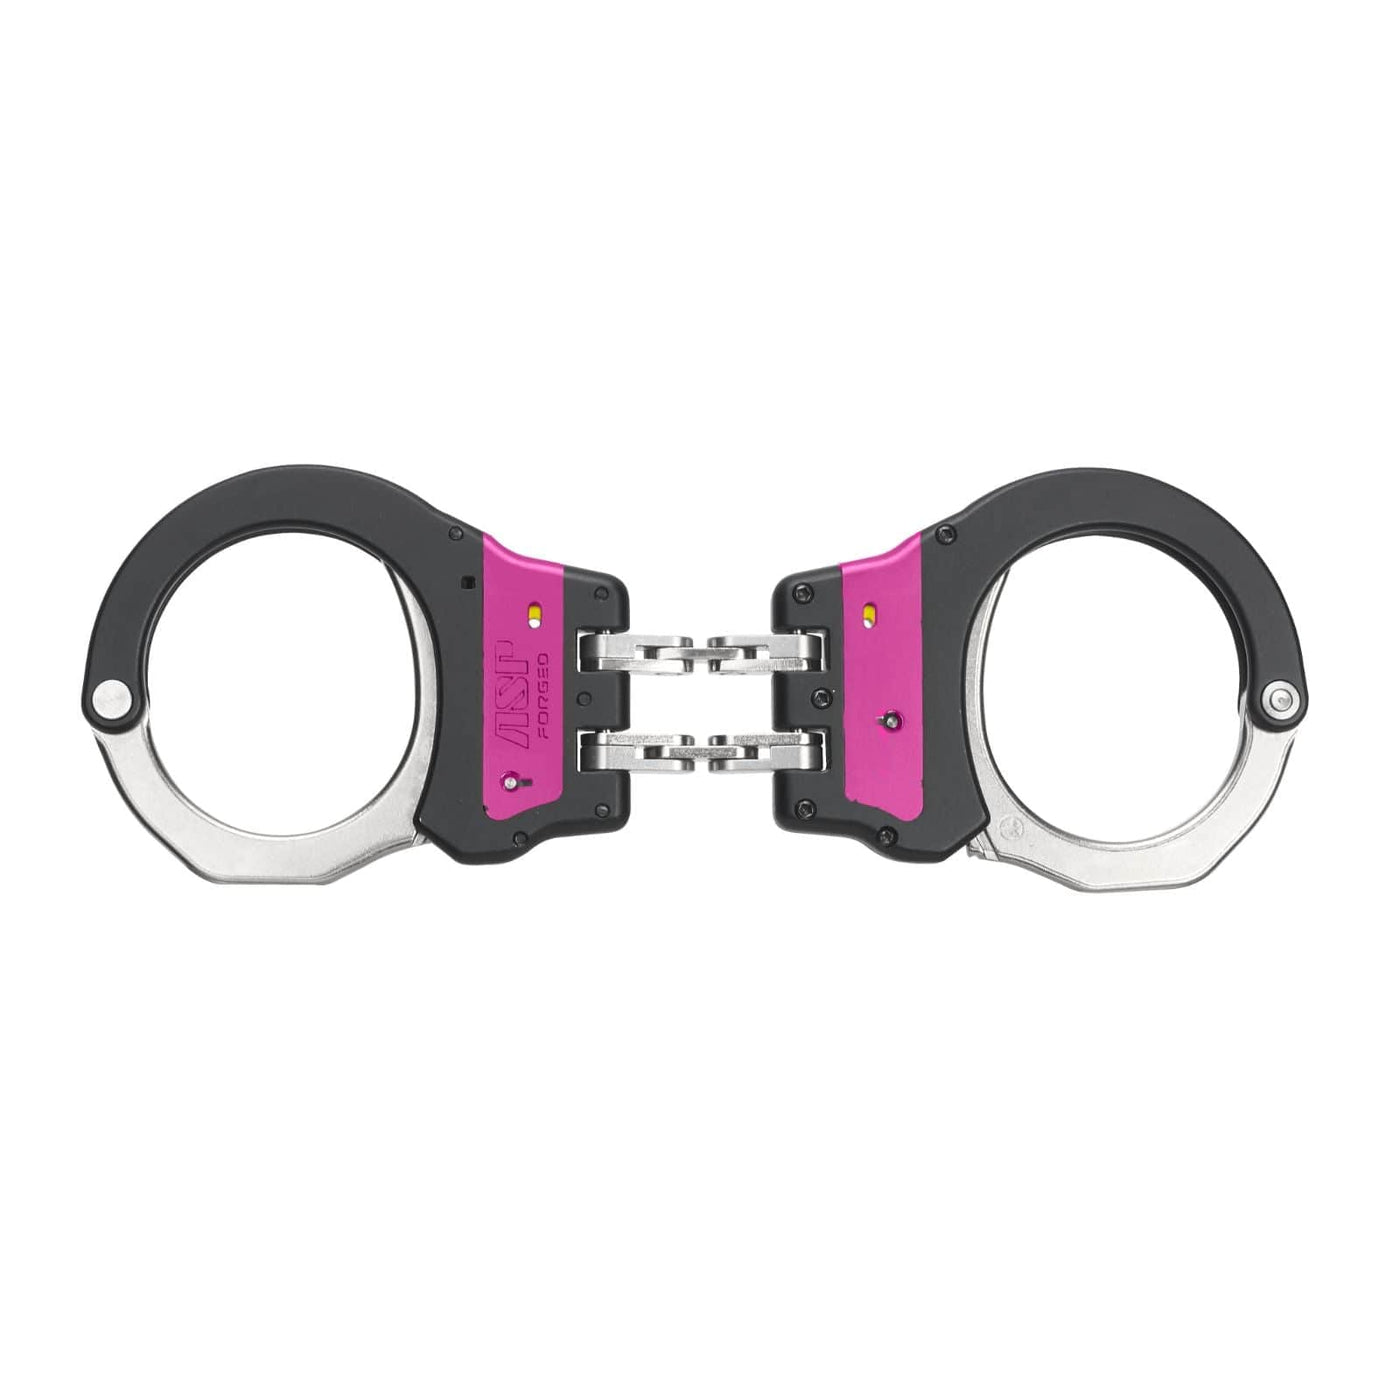 ASP ASP Identifier Hinge Ultra Cuffs Steel Bow Pink Public Safety And Le